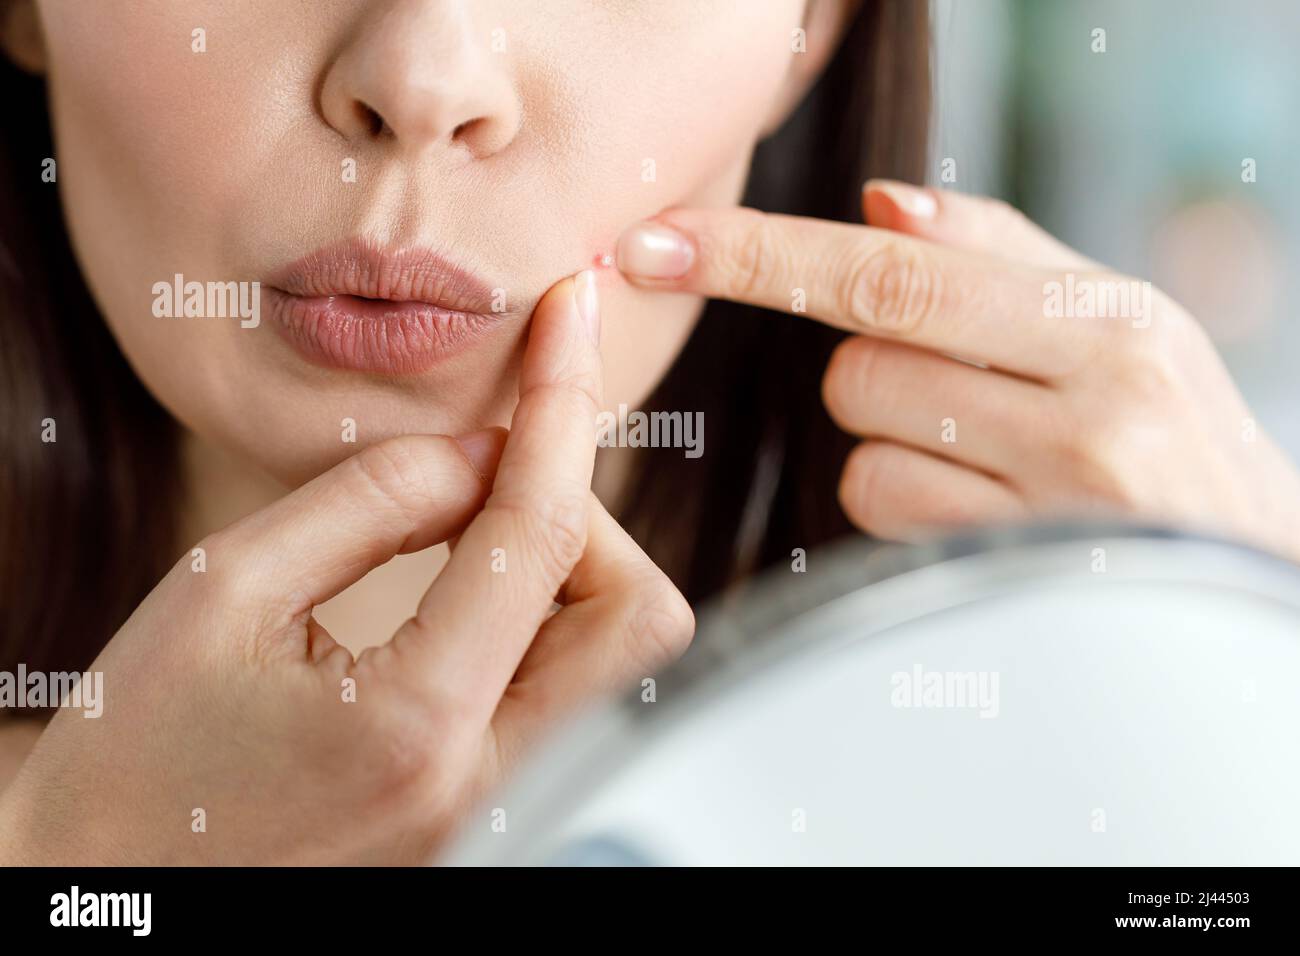 A woman crushes a pimple while looking in the mirror. Stock Photo